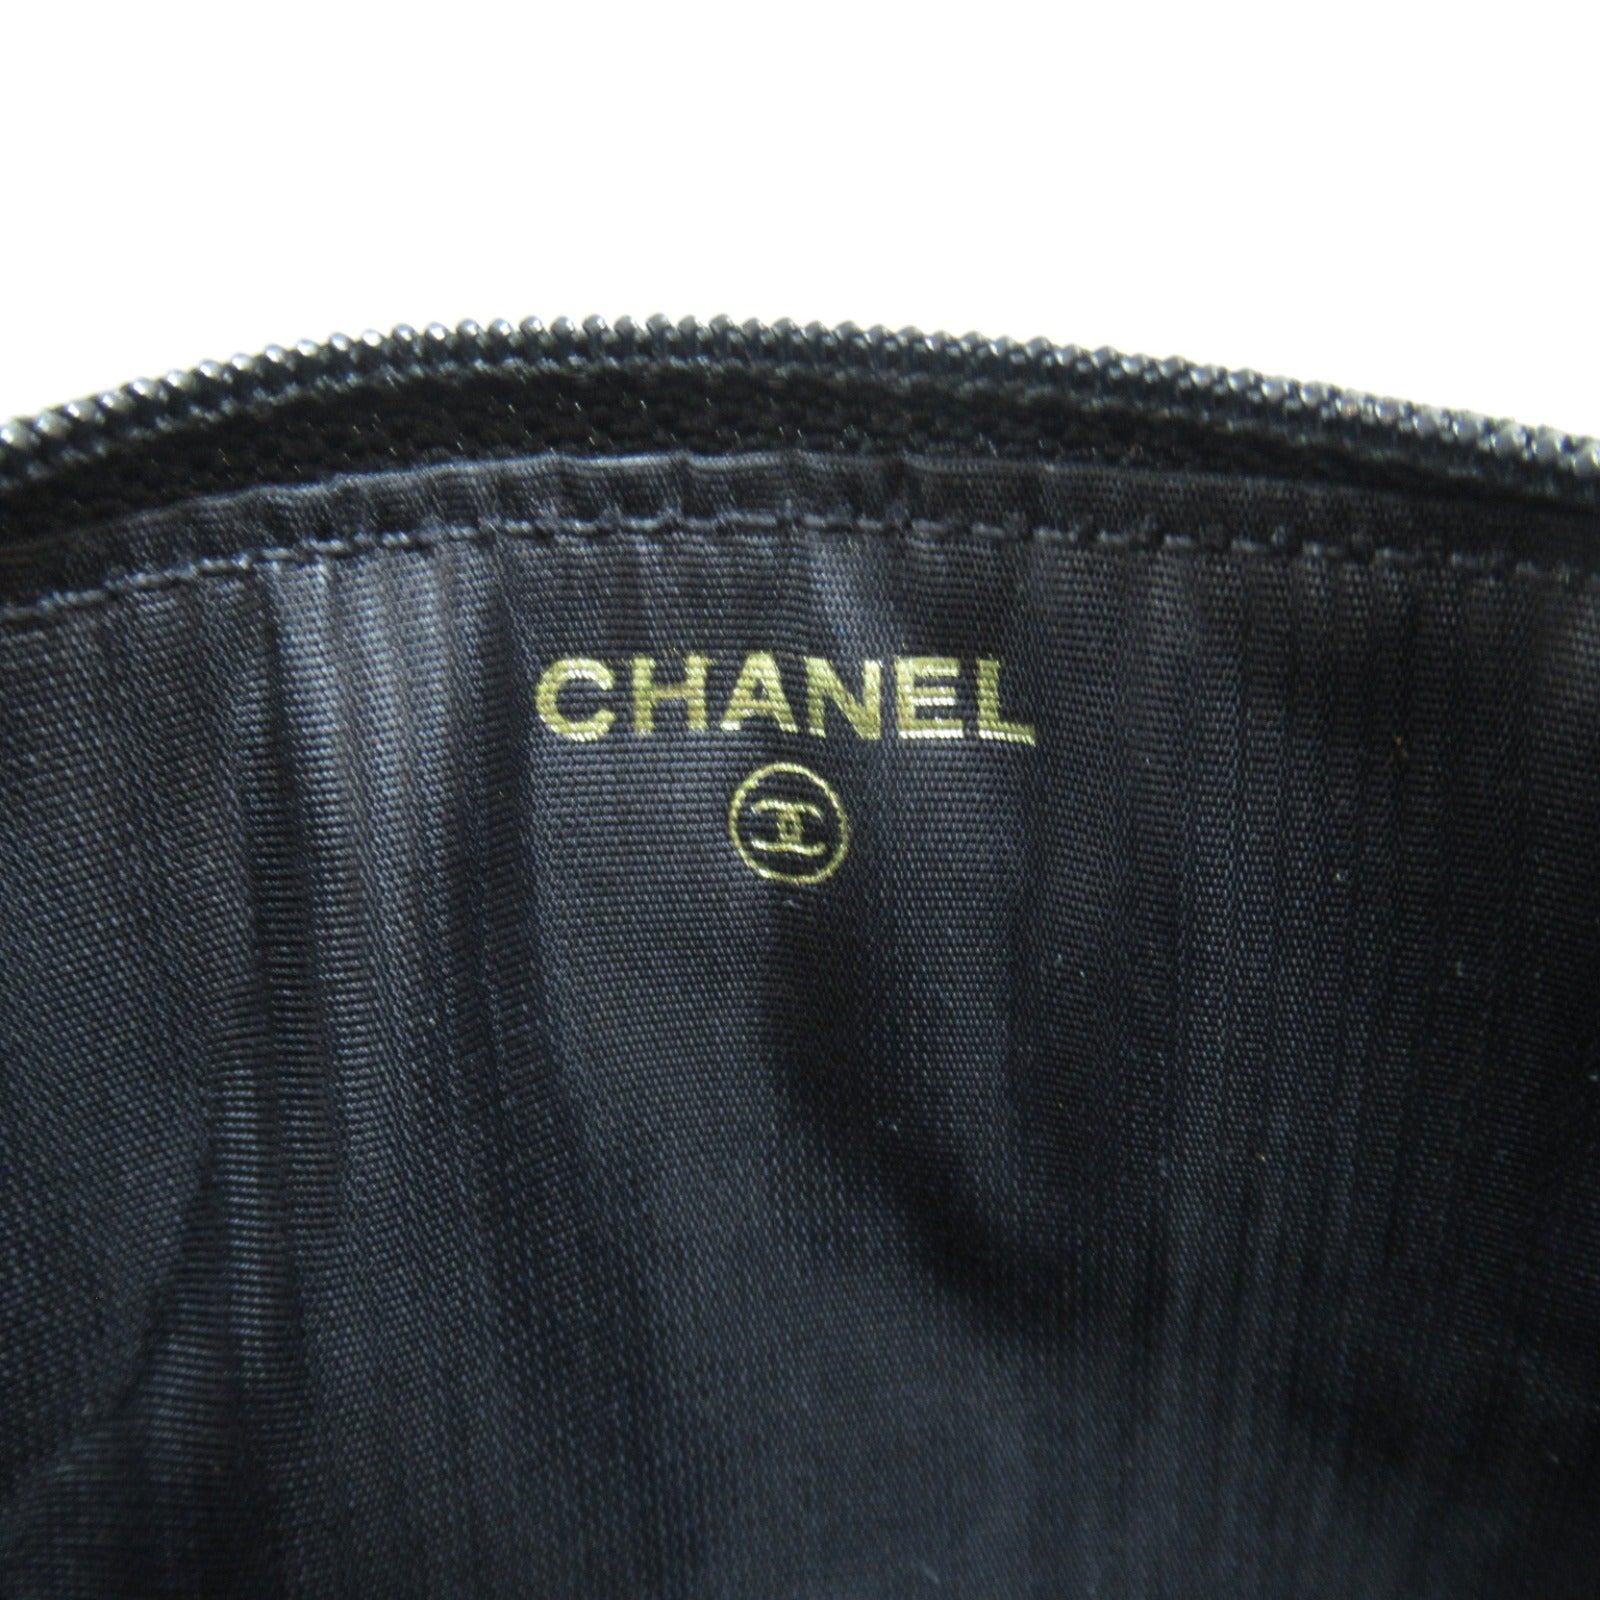 CHANEL CHANEL Key &amp; Coin Case Key Case Accessories    Black